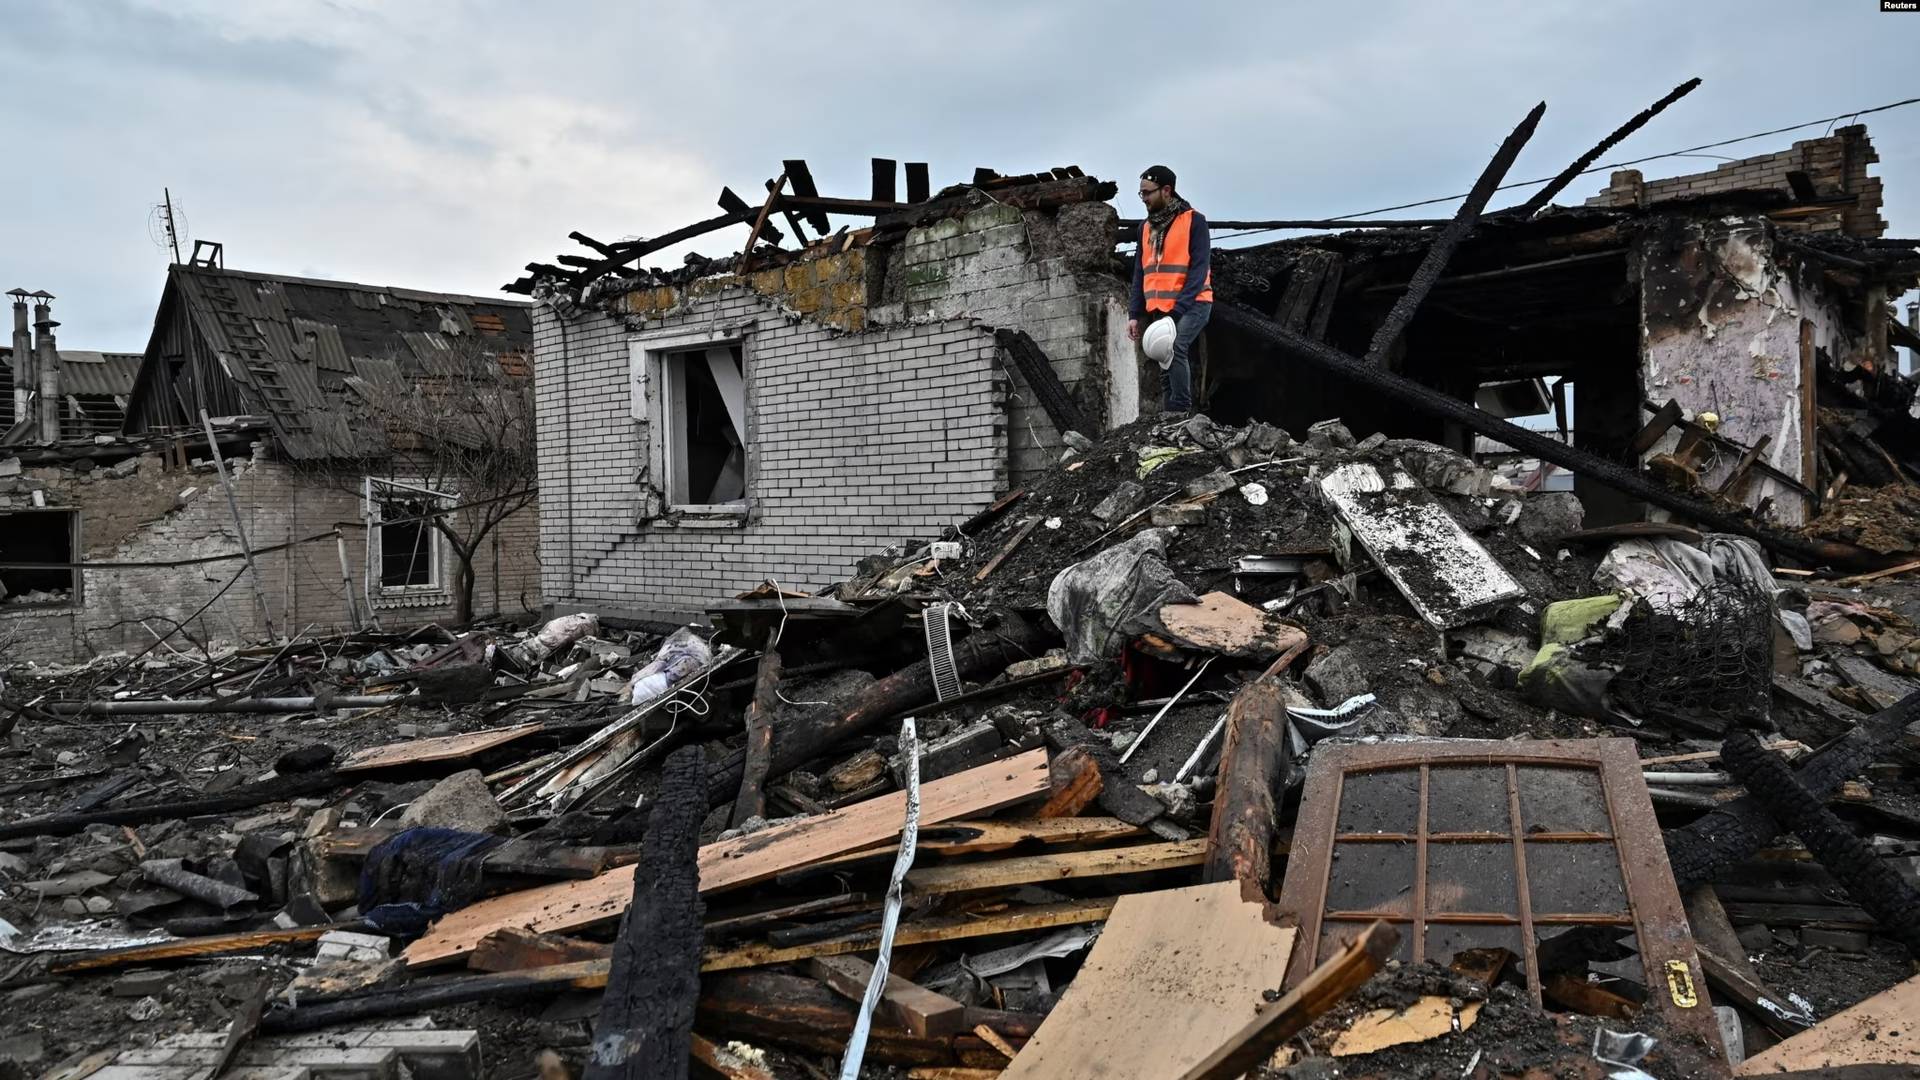 A volunteer inspects the aftermath of a Russian missile strike overnight on a residential area in Zaporizhzhya